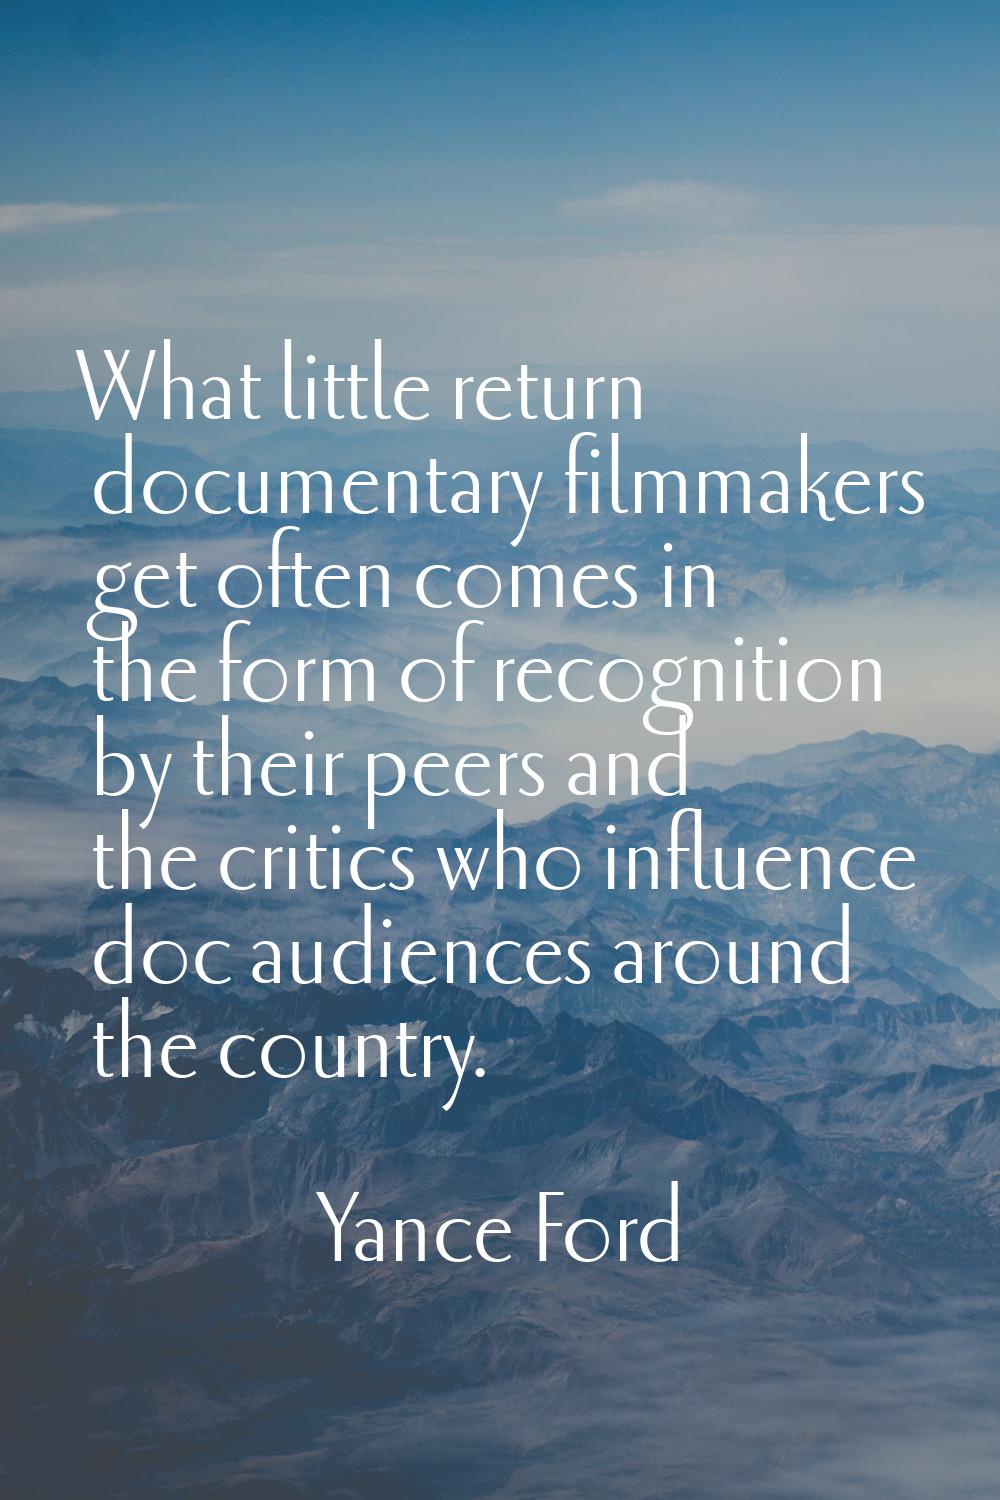 What little return documentary filmmakers get often comes in the form of recognition by their peers